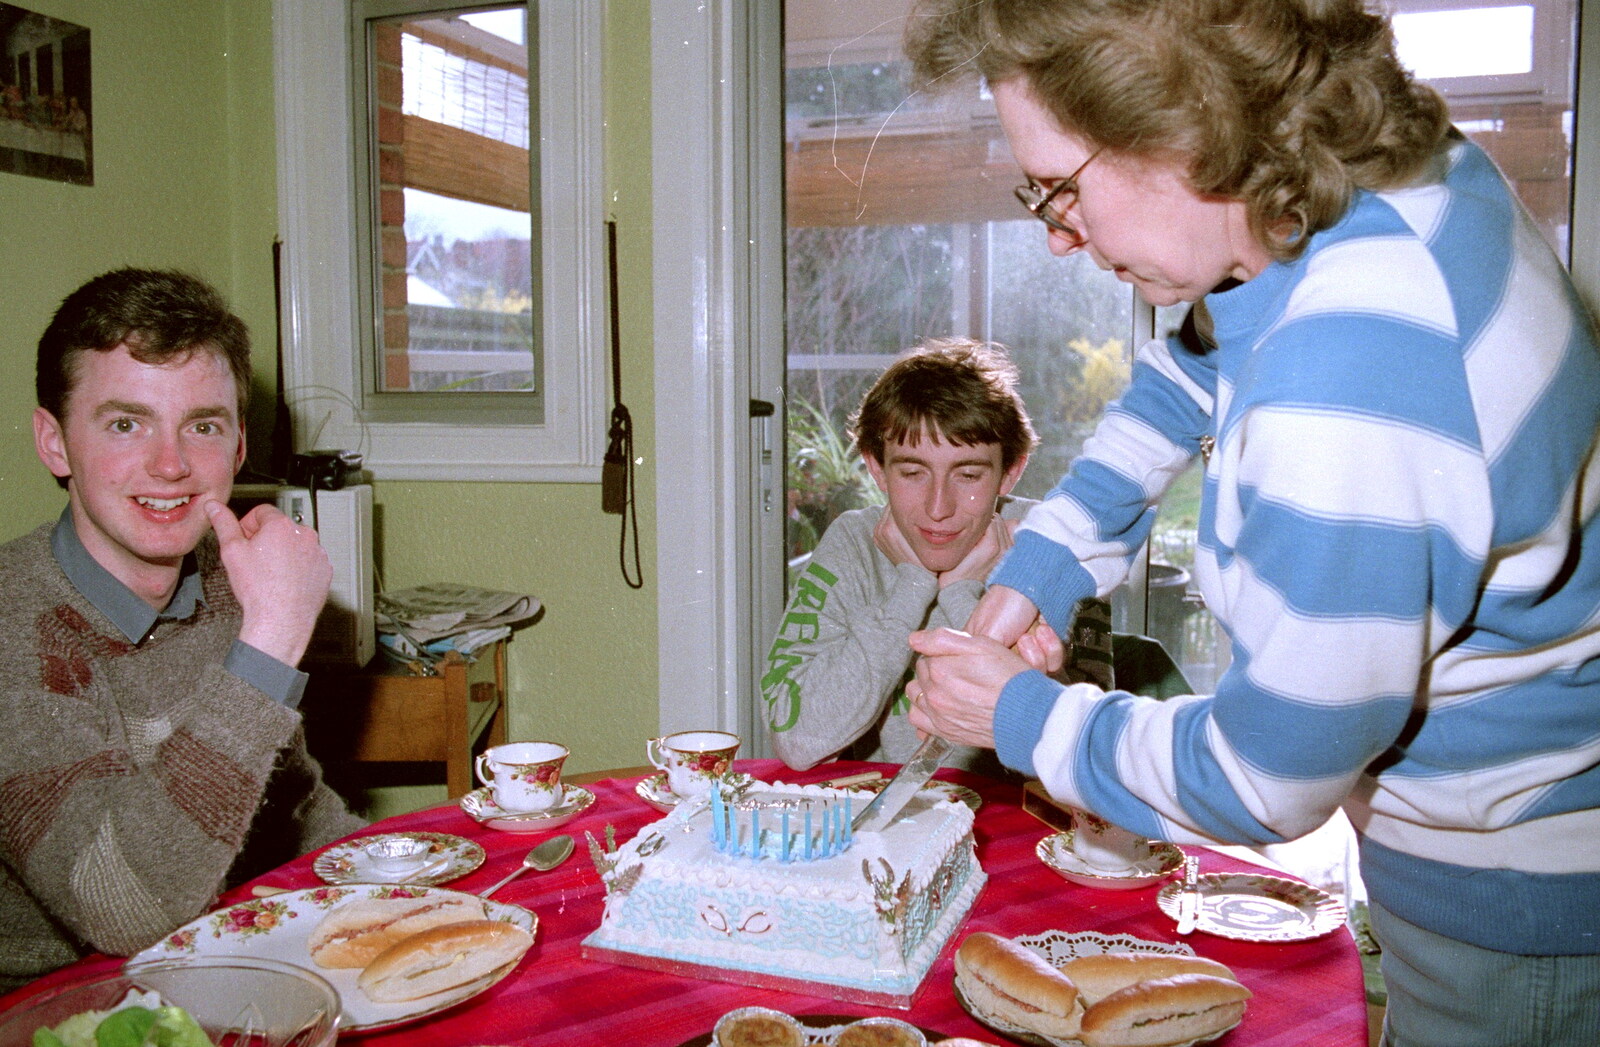 The cutting of the cake from Trotsky's Birthday, New Malden, Kingston Upon Thames - 20th April 1986